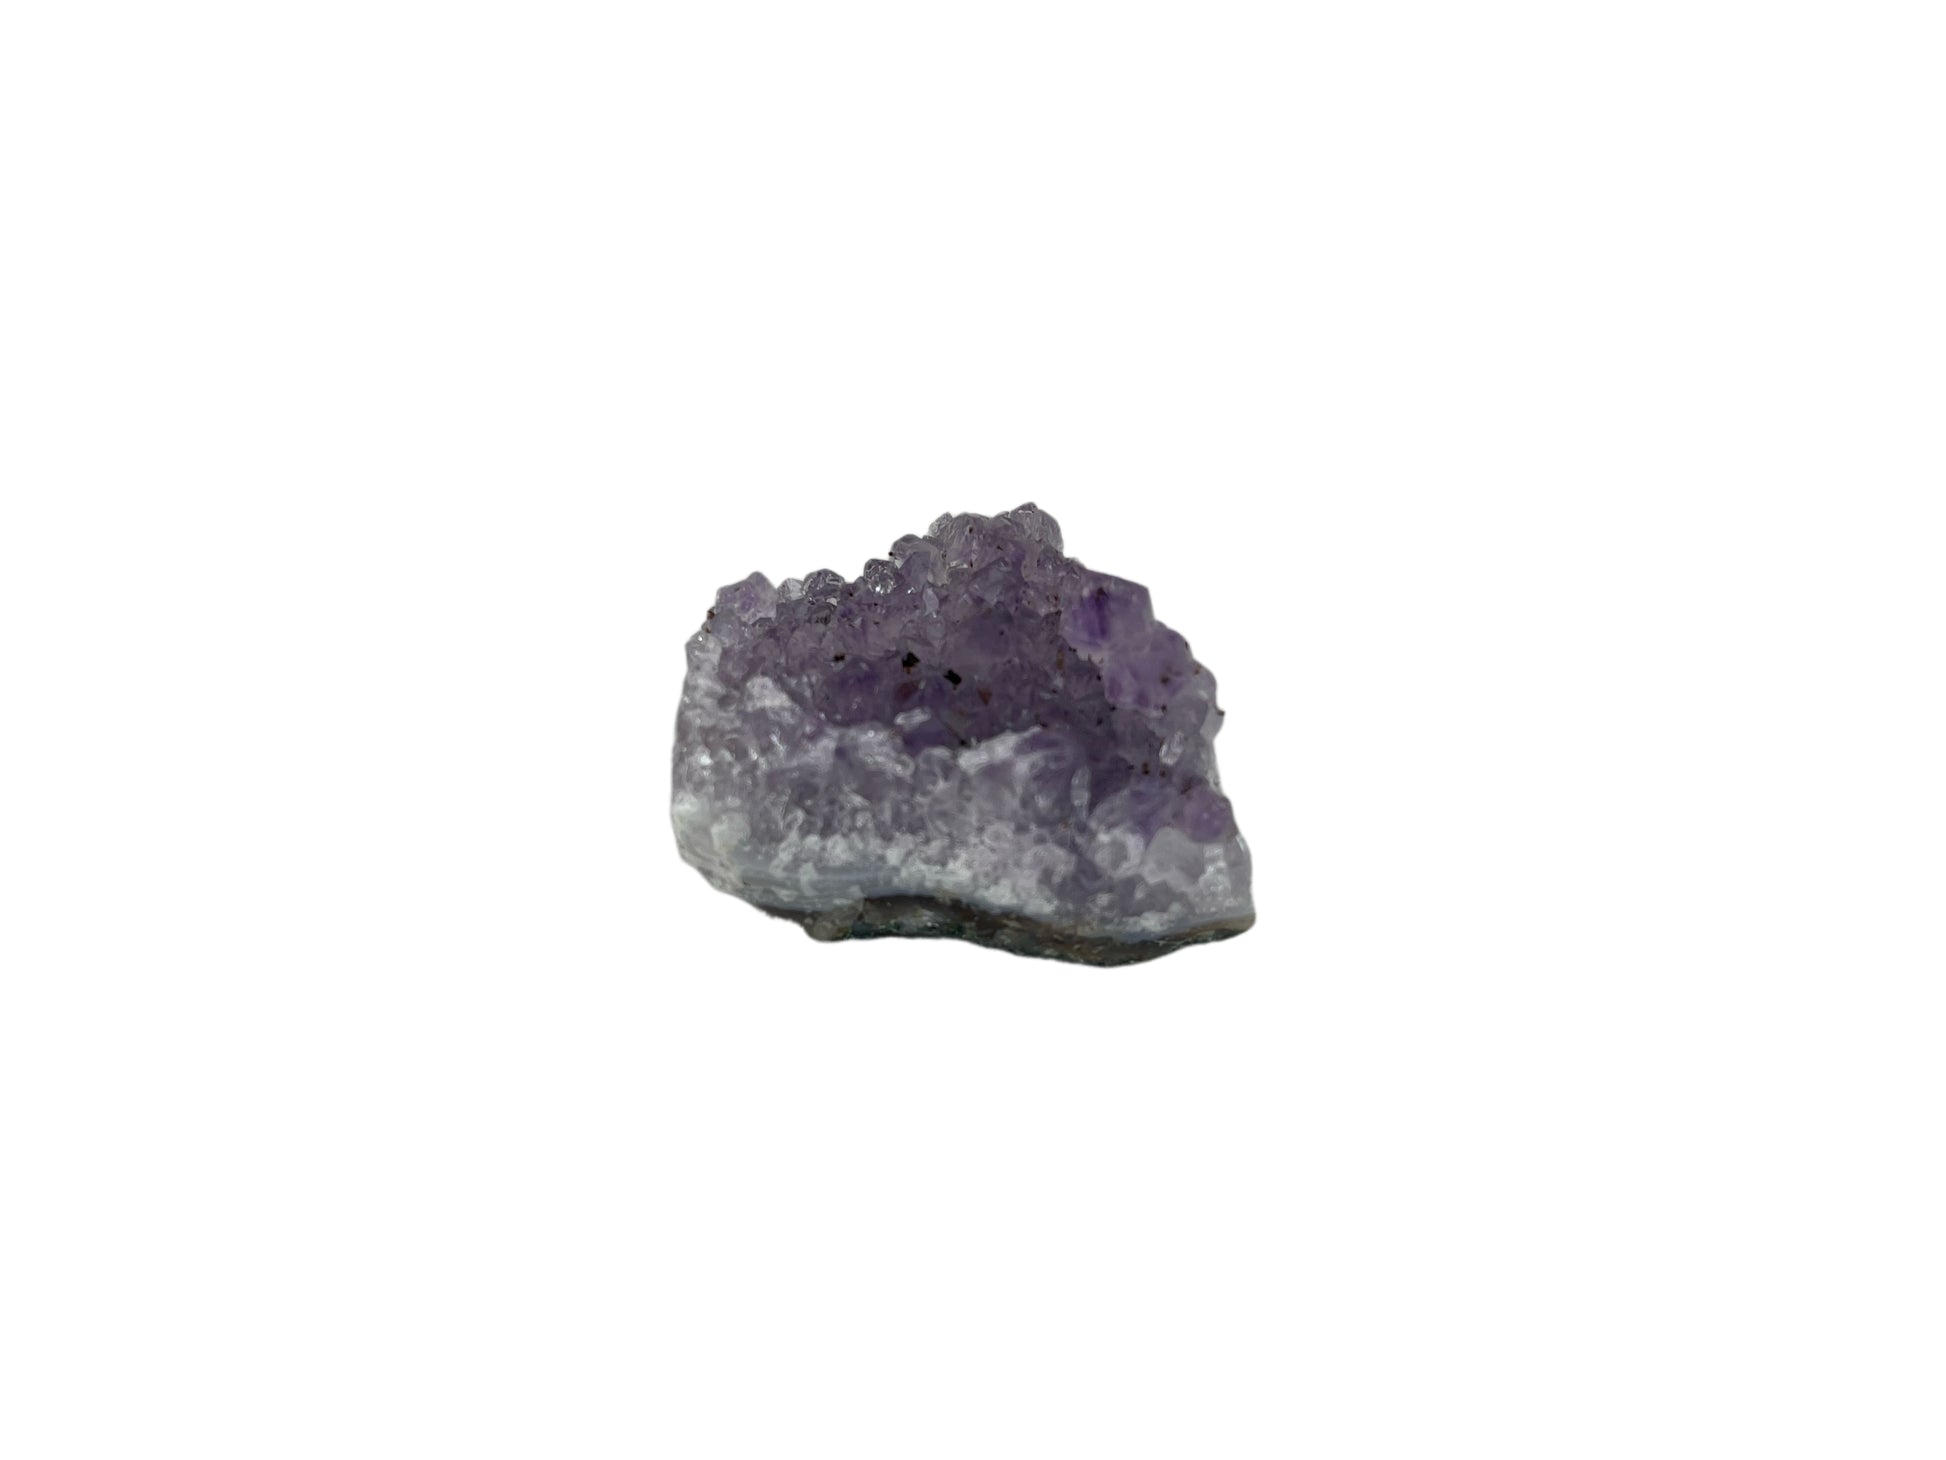 Small purple crystal, roughly 1 in by 1 in